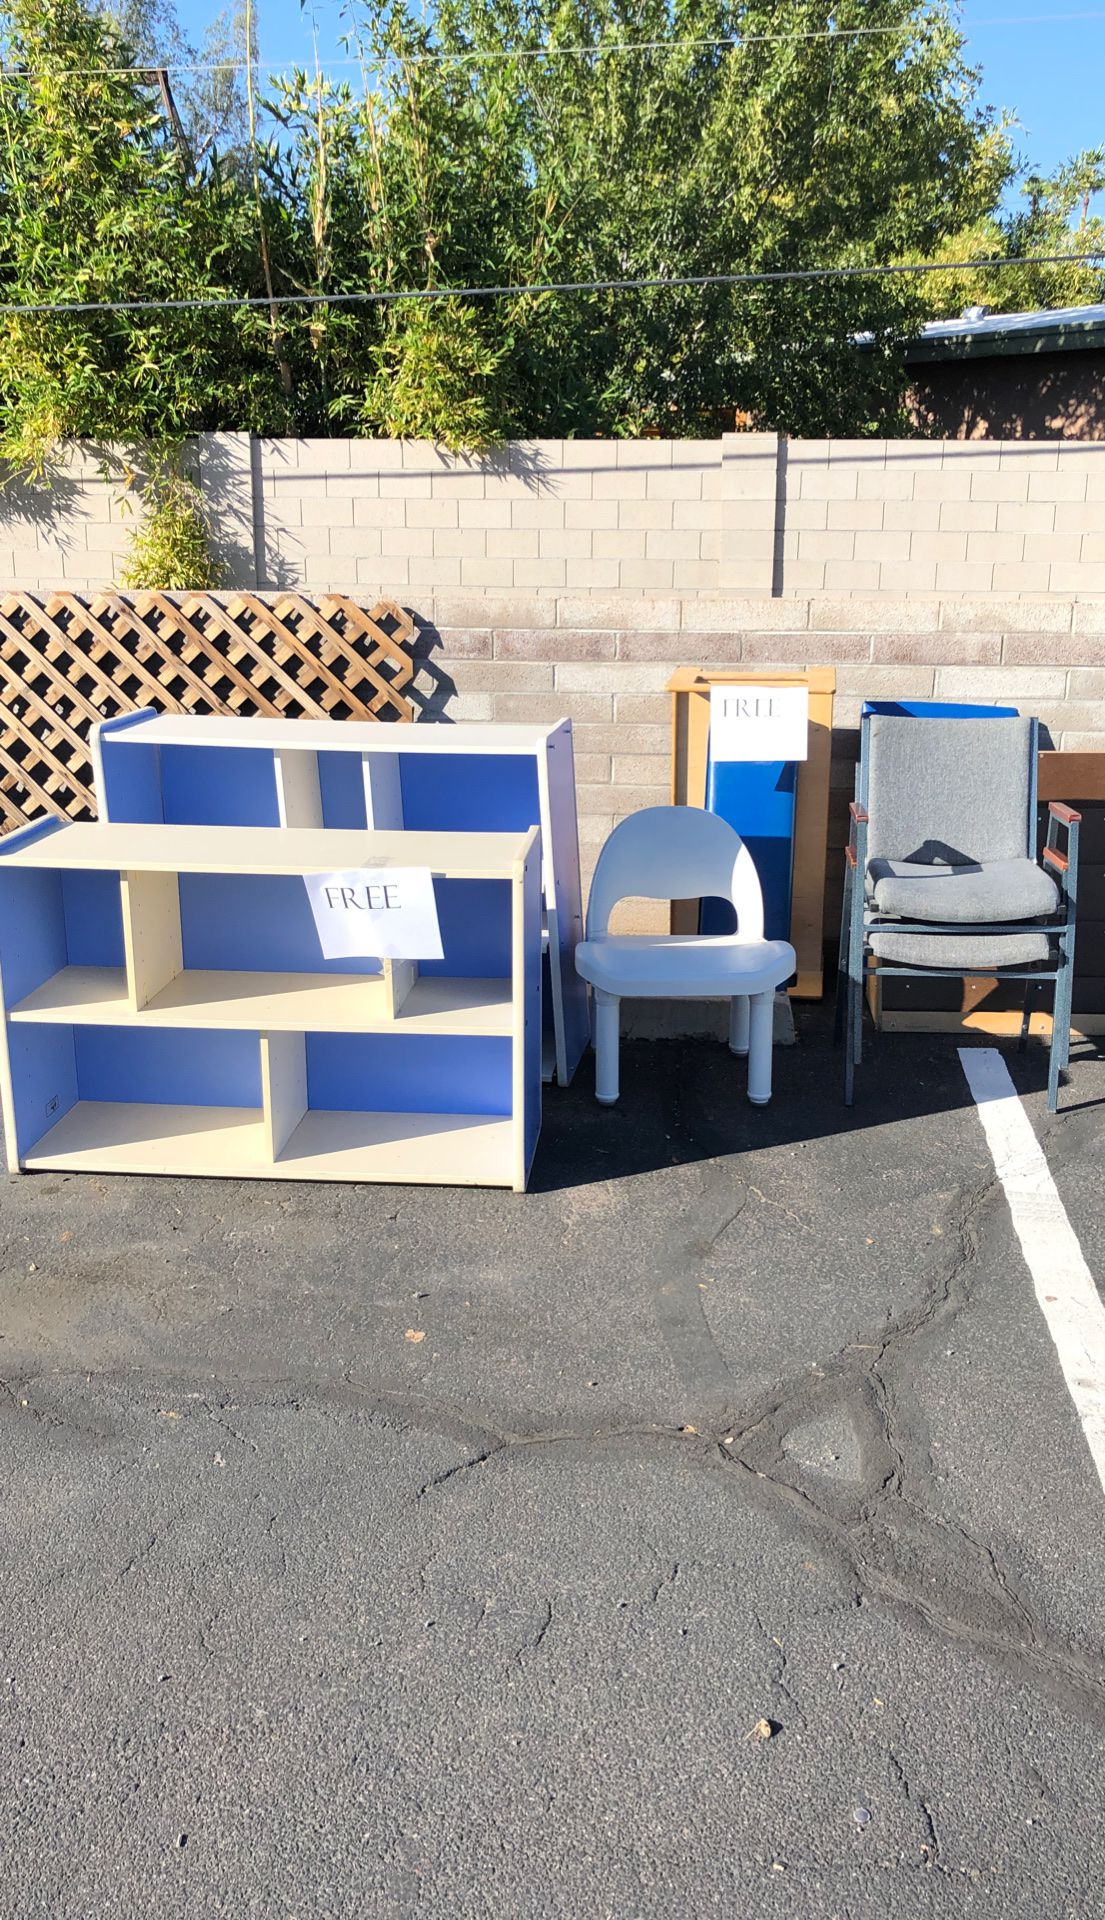 FREE Misc. chairs, kids bookshelves, bench